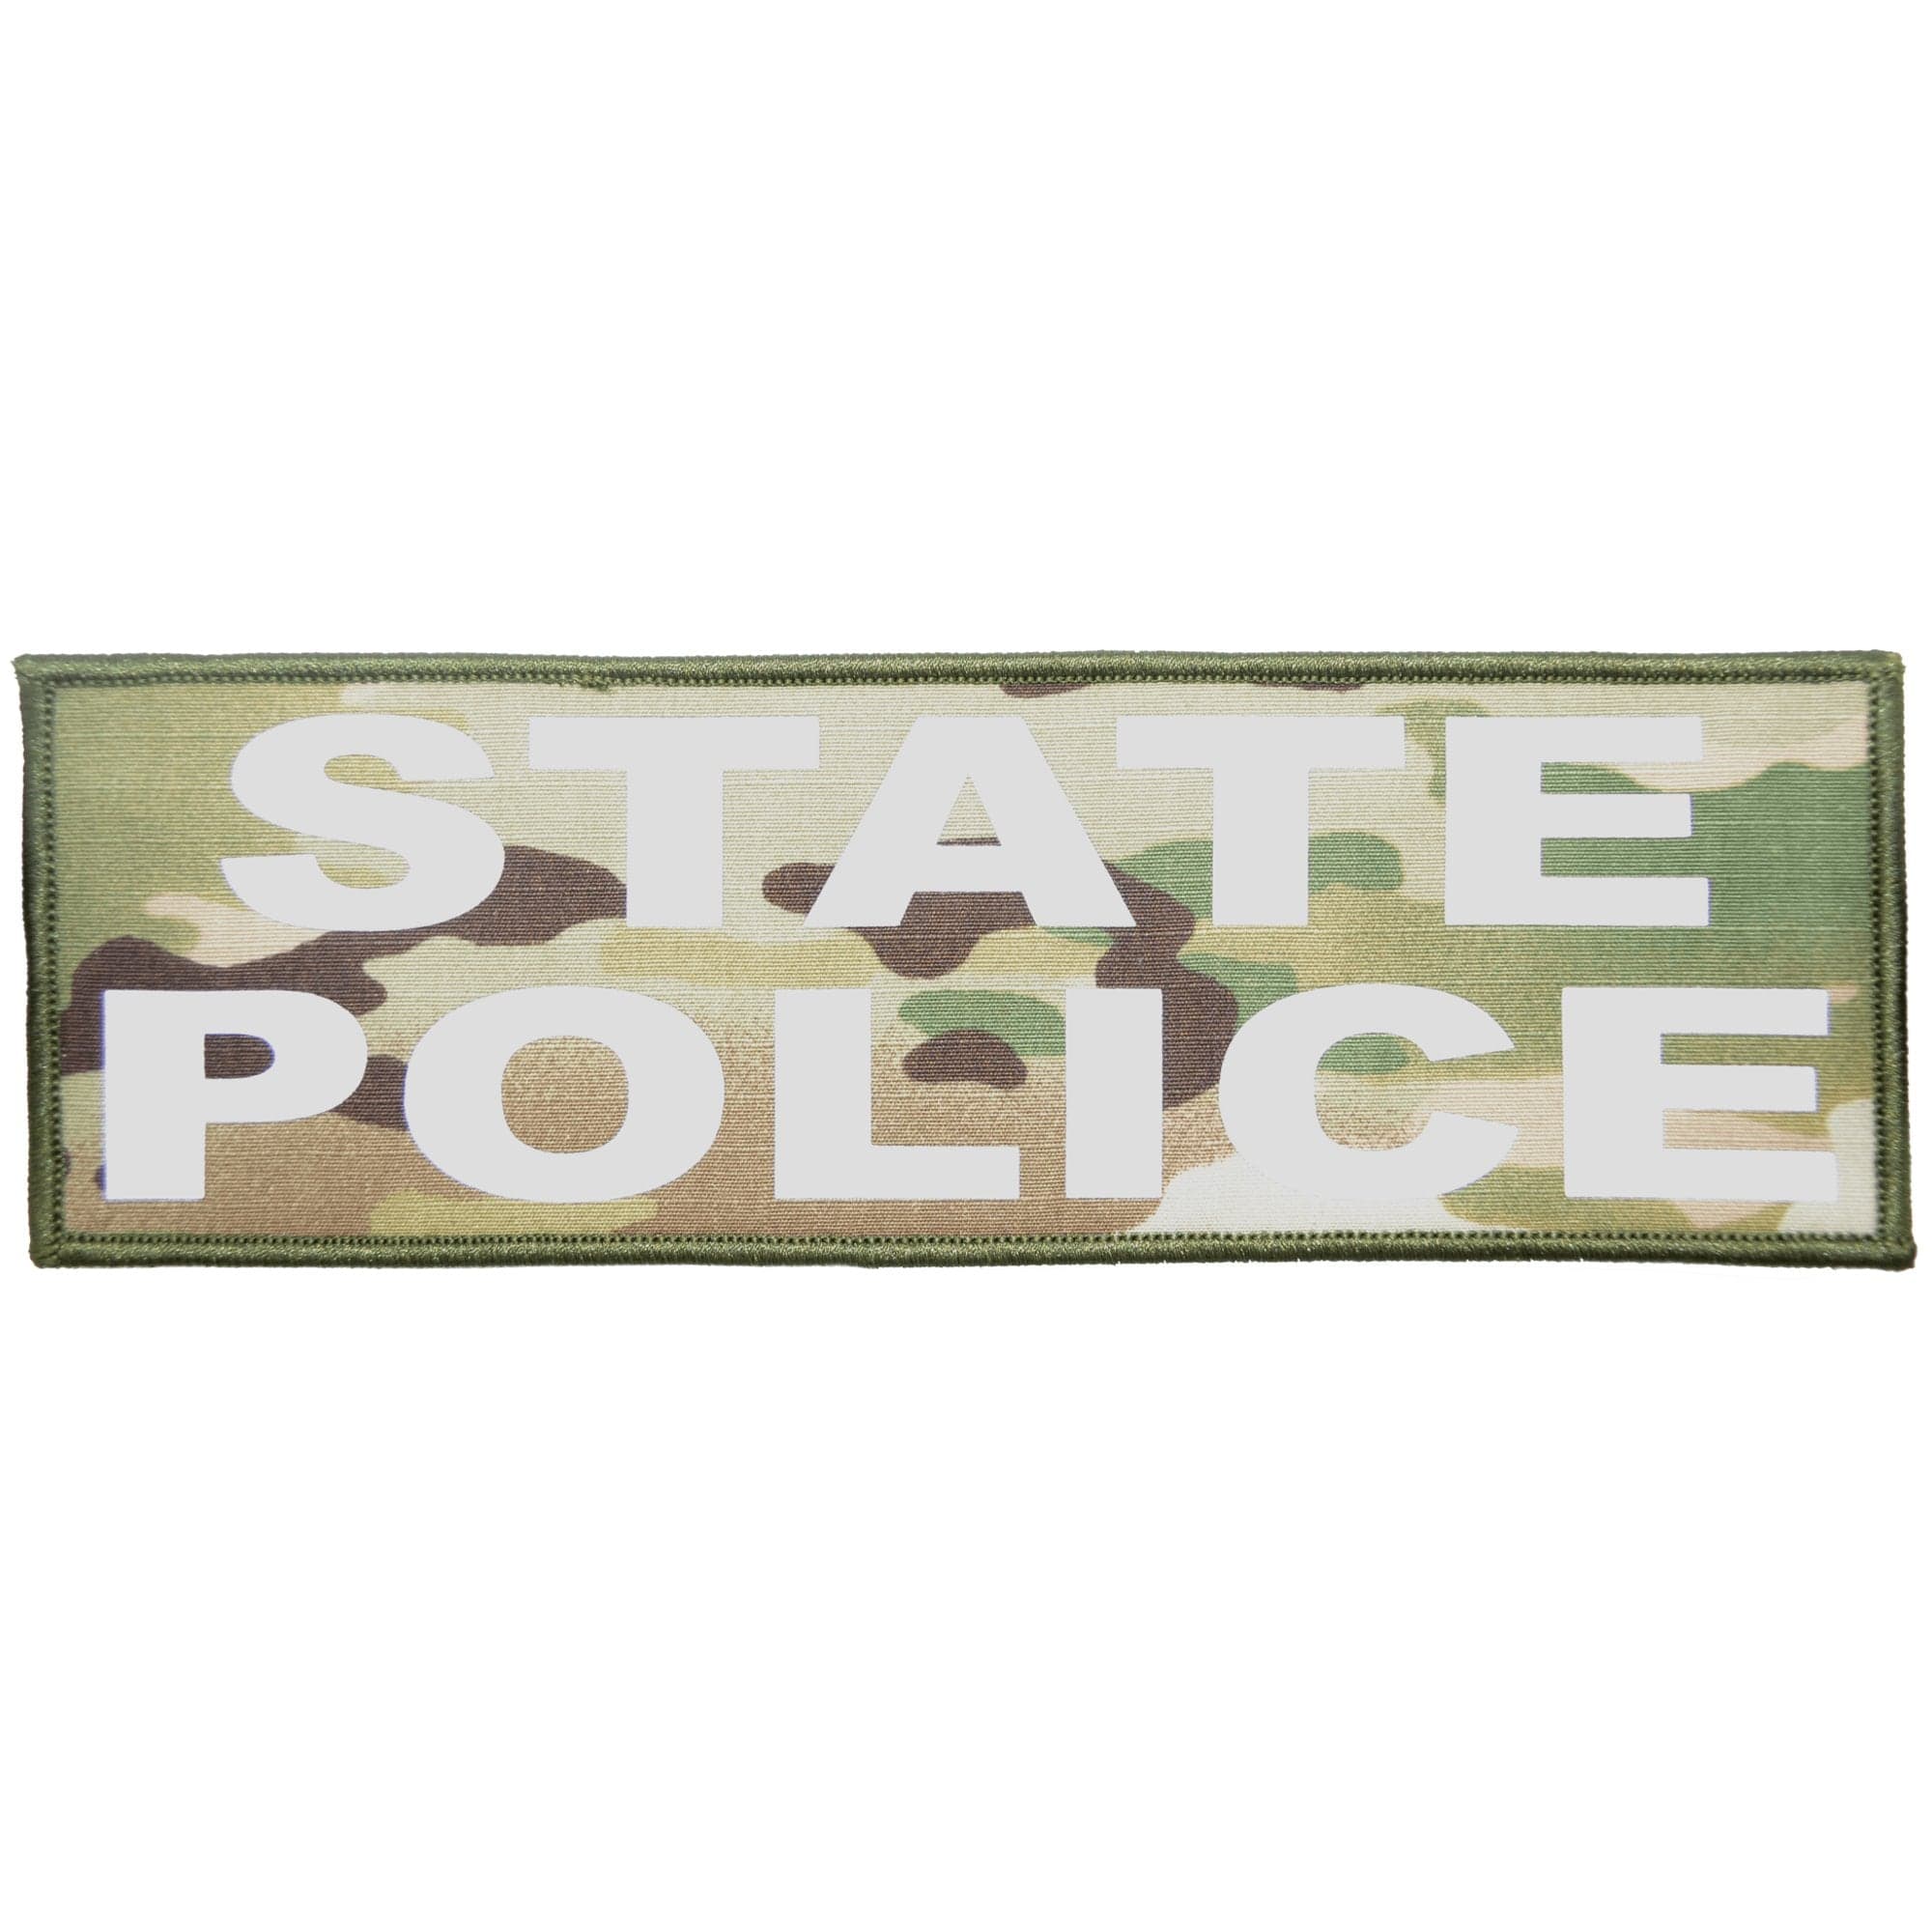 State Police Reflective - 4x12 Patch